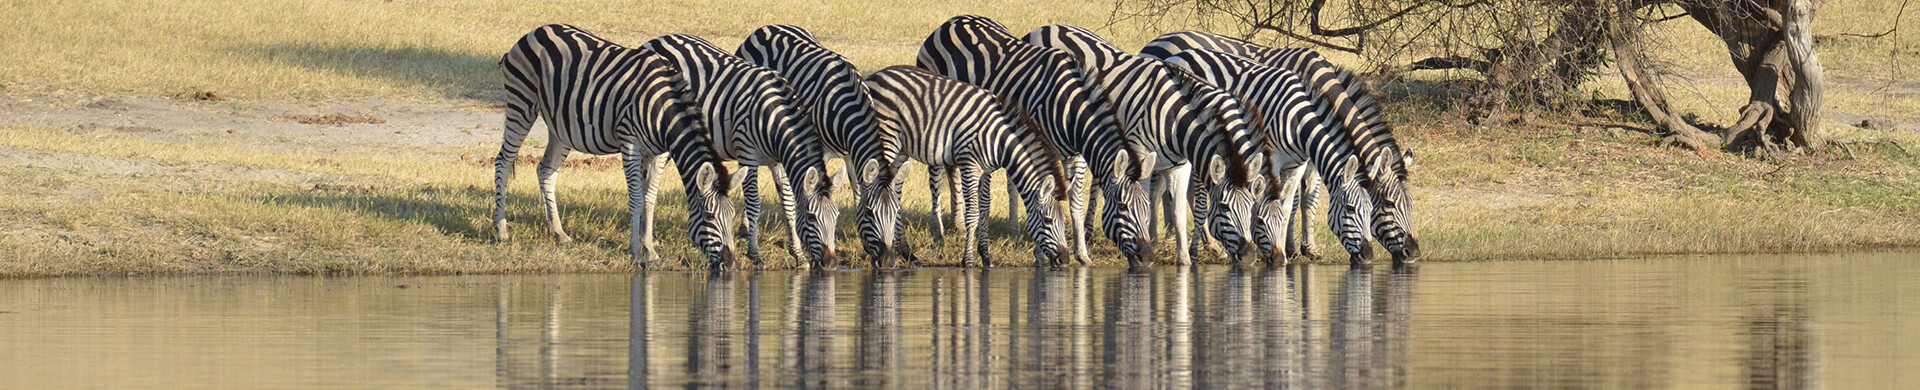 Zebras drinking at watering hole